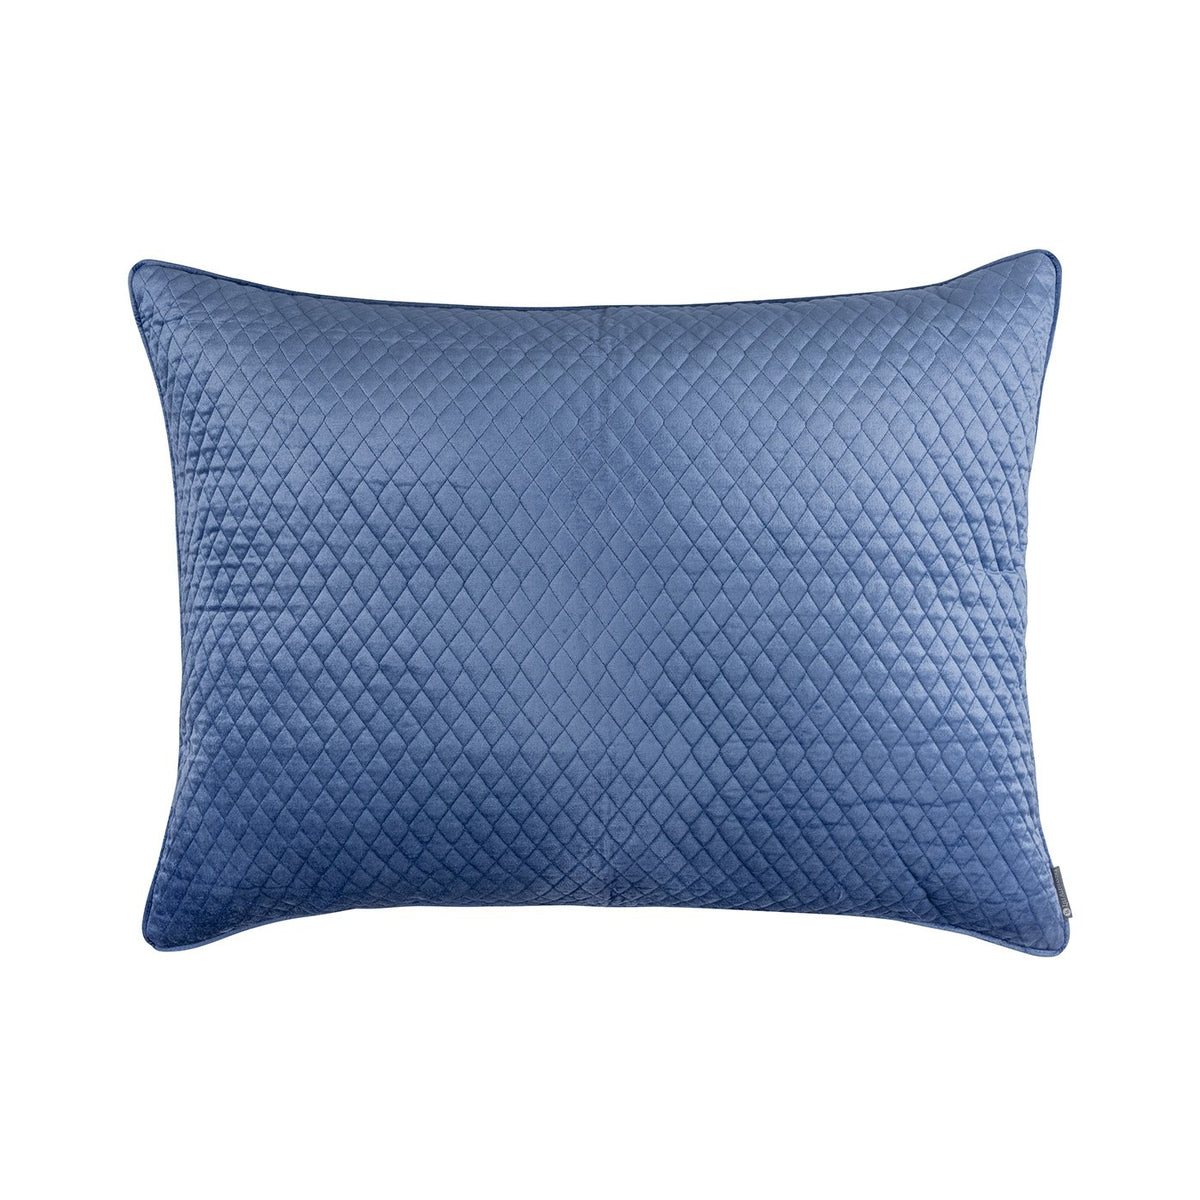 Valentina Azure Quilted Luxe Euro Pillow by Lili Alessandra